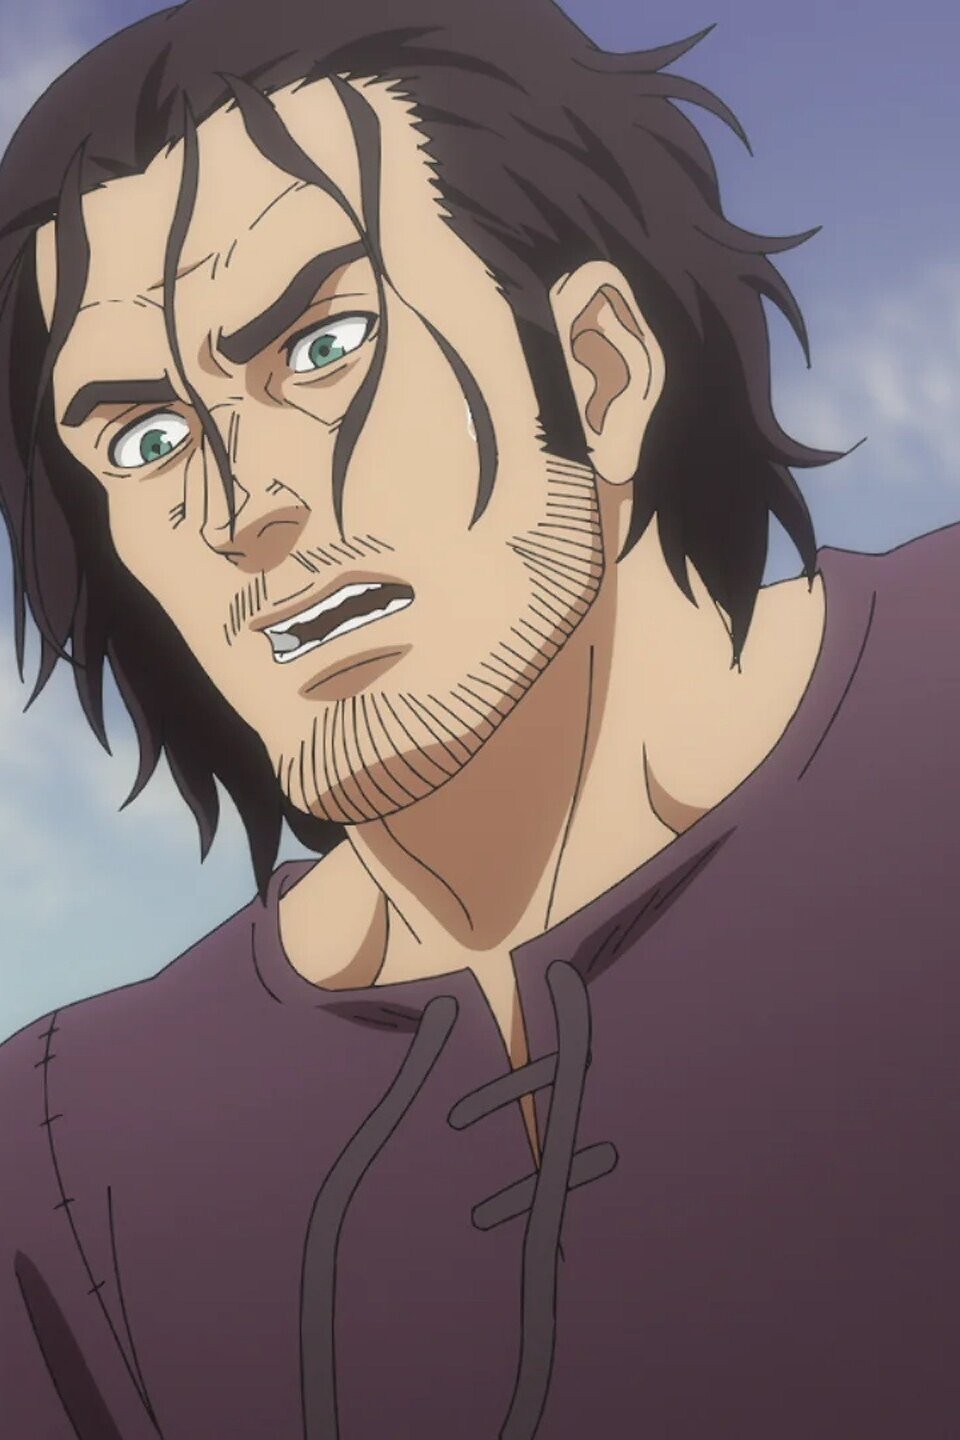 Vinland Saga season 2 finale: Release date and time, countdown, where to  watch, and more